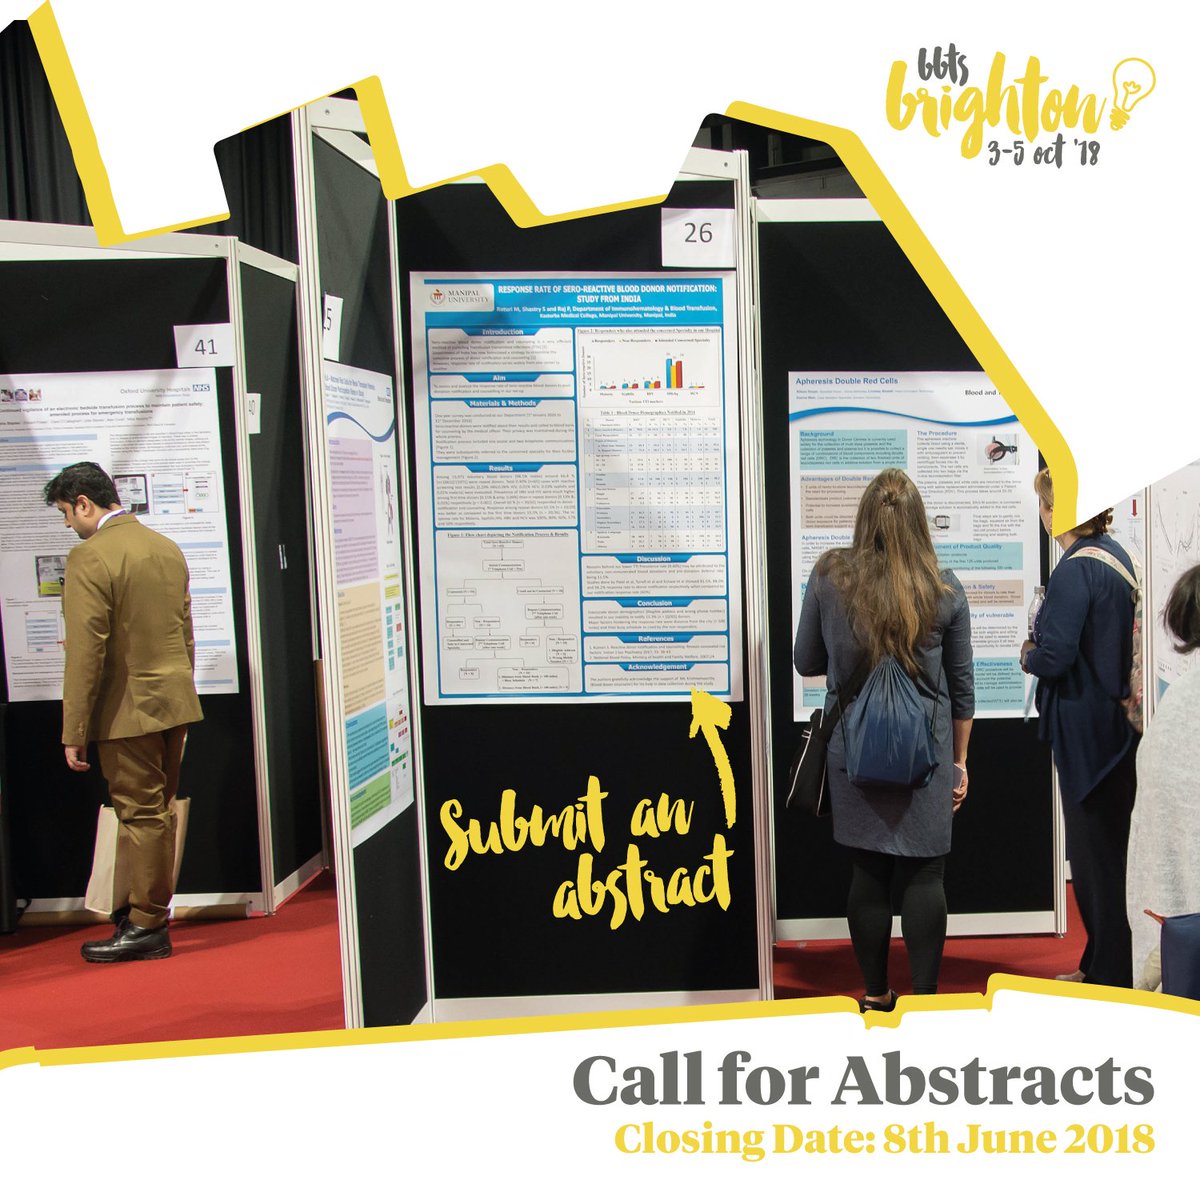 Call for #BBTSBrighton abstracts! One month countdown

Submit by 8th June. Categories: #improvingpatientoutcomes #DiagnosticsScienceandTechnology #Education #QualityRegulationandGovernance #BloodDonationComponentsandSafety #CellulartherapiesTissuesCells

bbts.org.uk